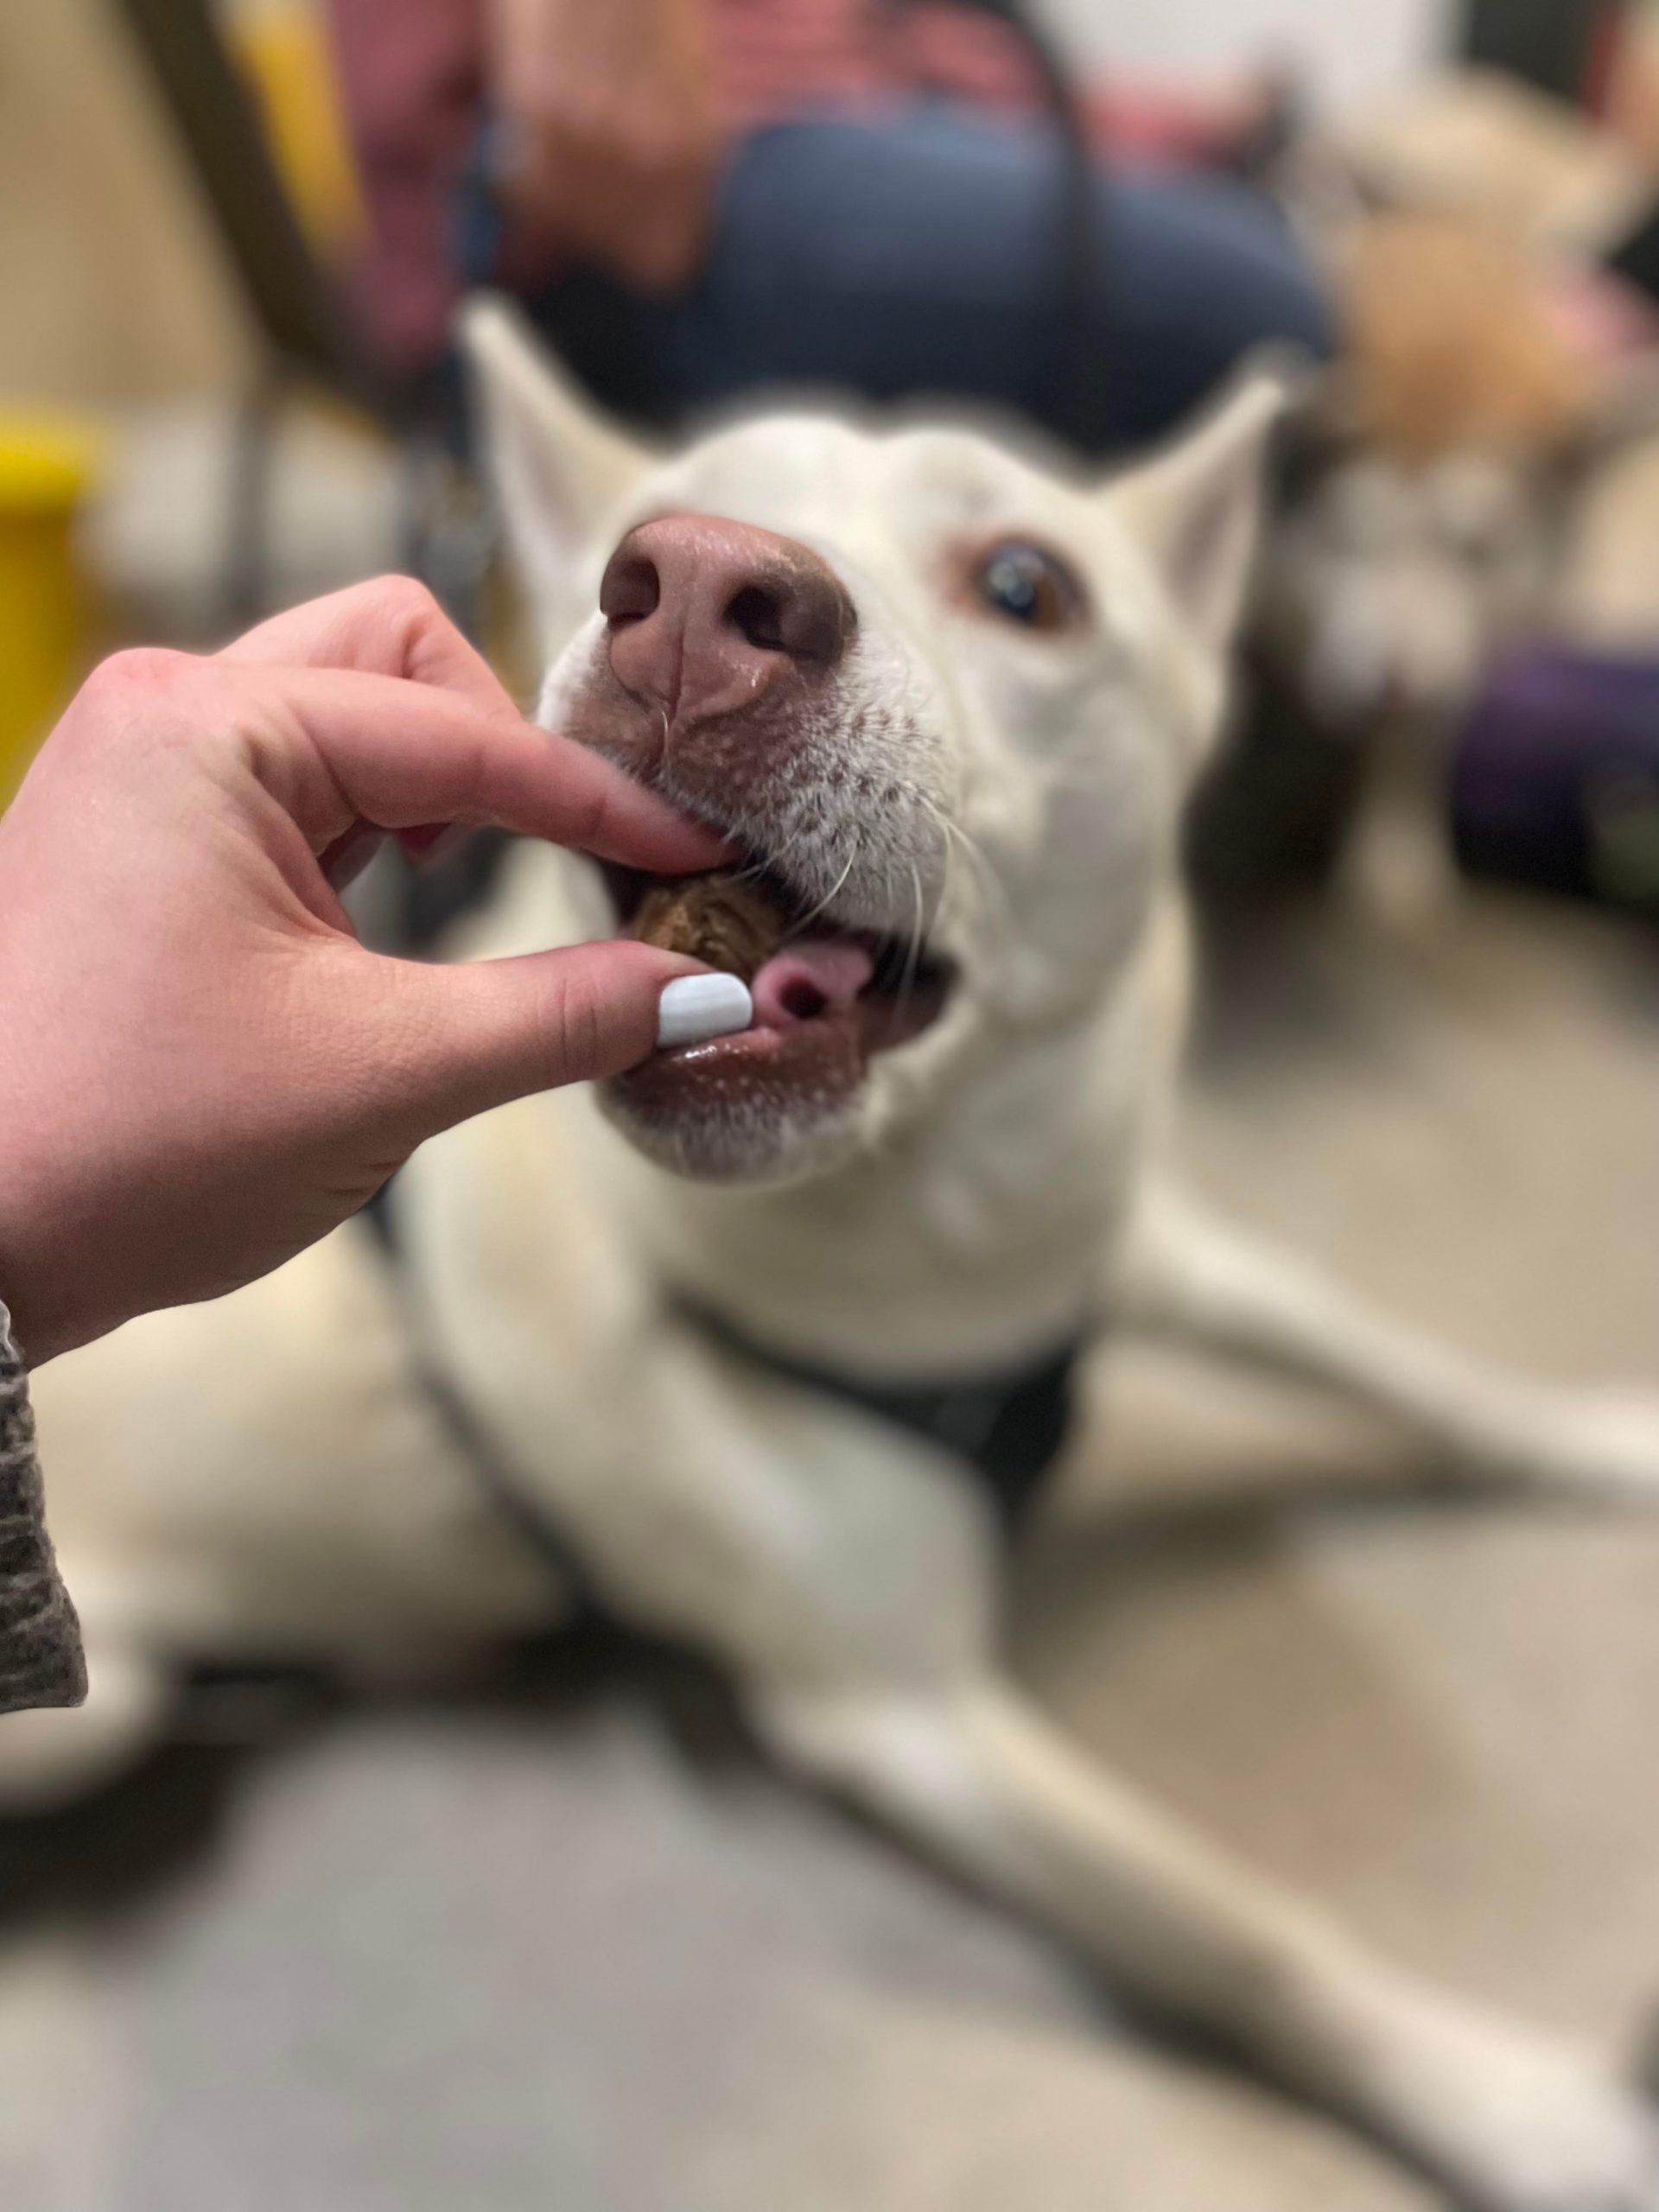 A white German Shepard type dog takes a treat from someone's hand.